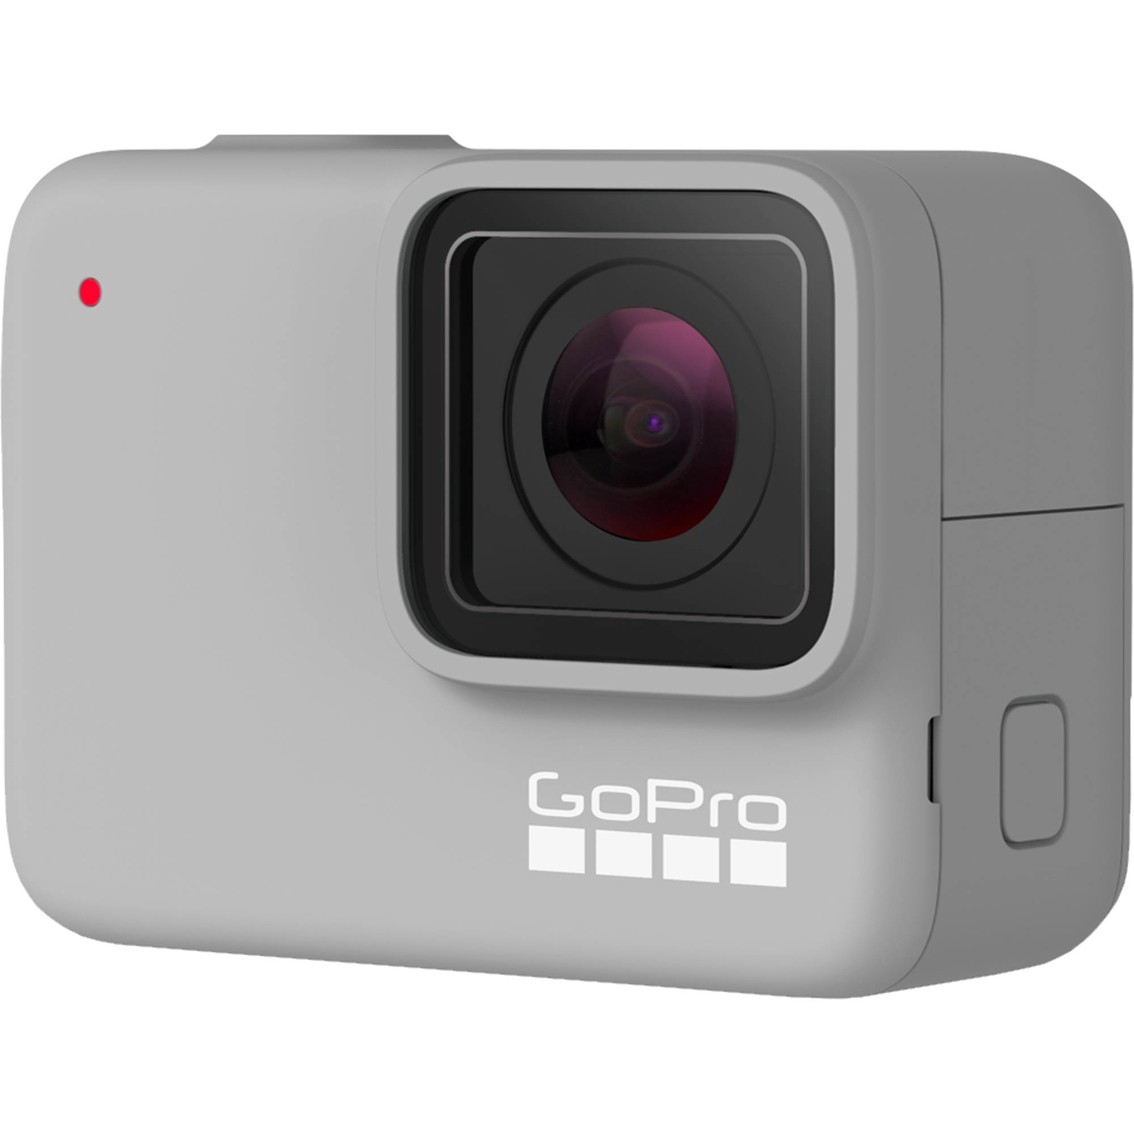 Updated GoPro Hero 7 Black, Silver and White camera specifications 